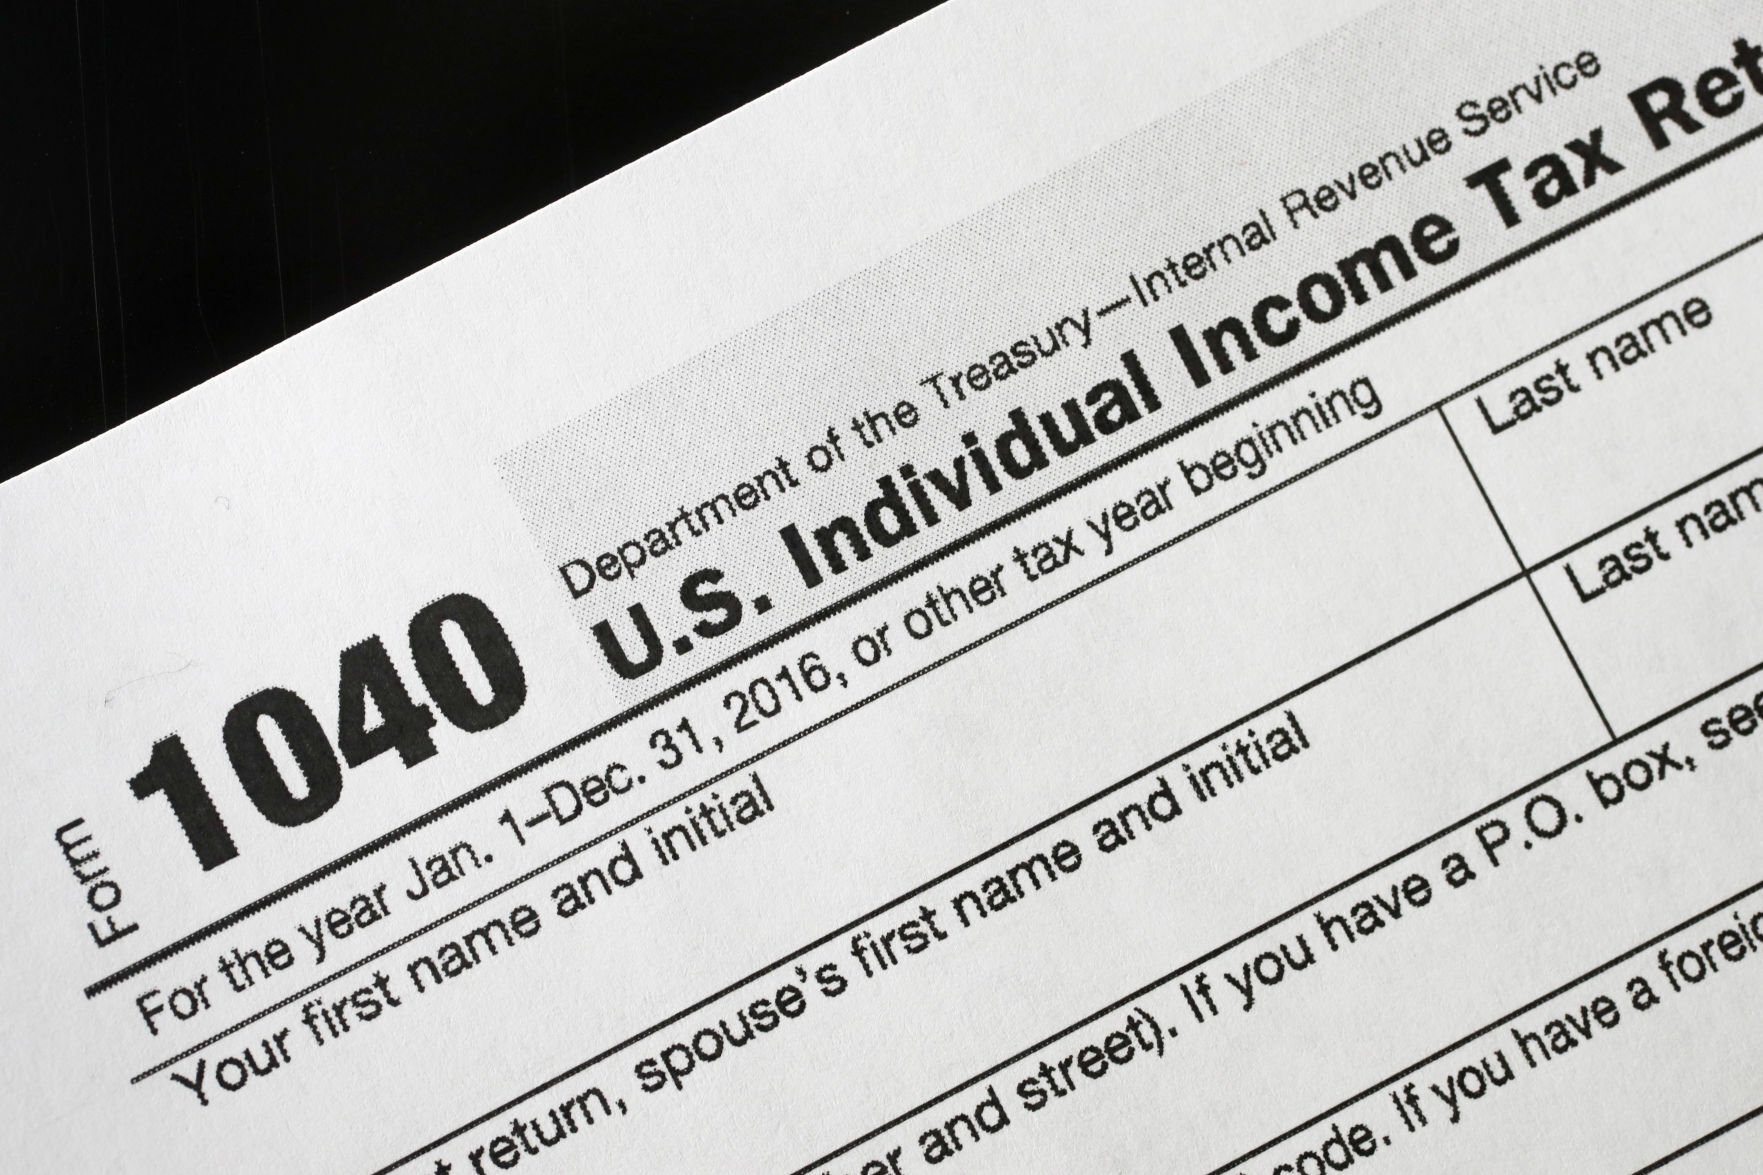 how to file a 2016 tax extension